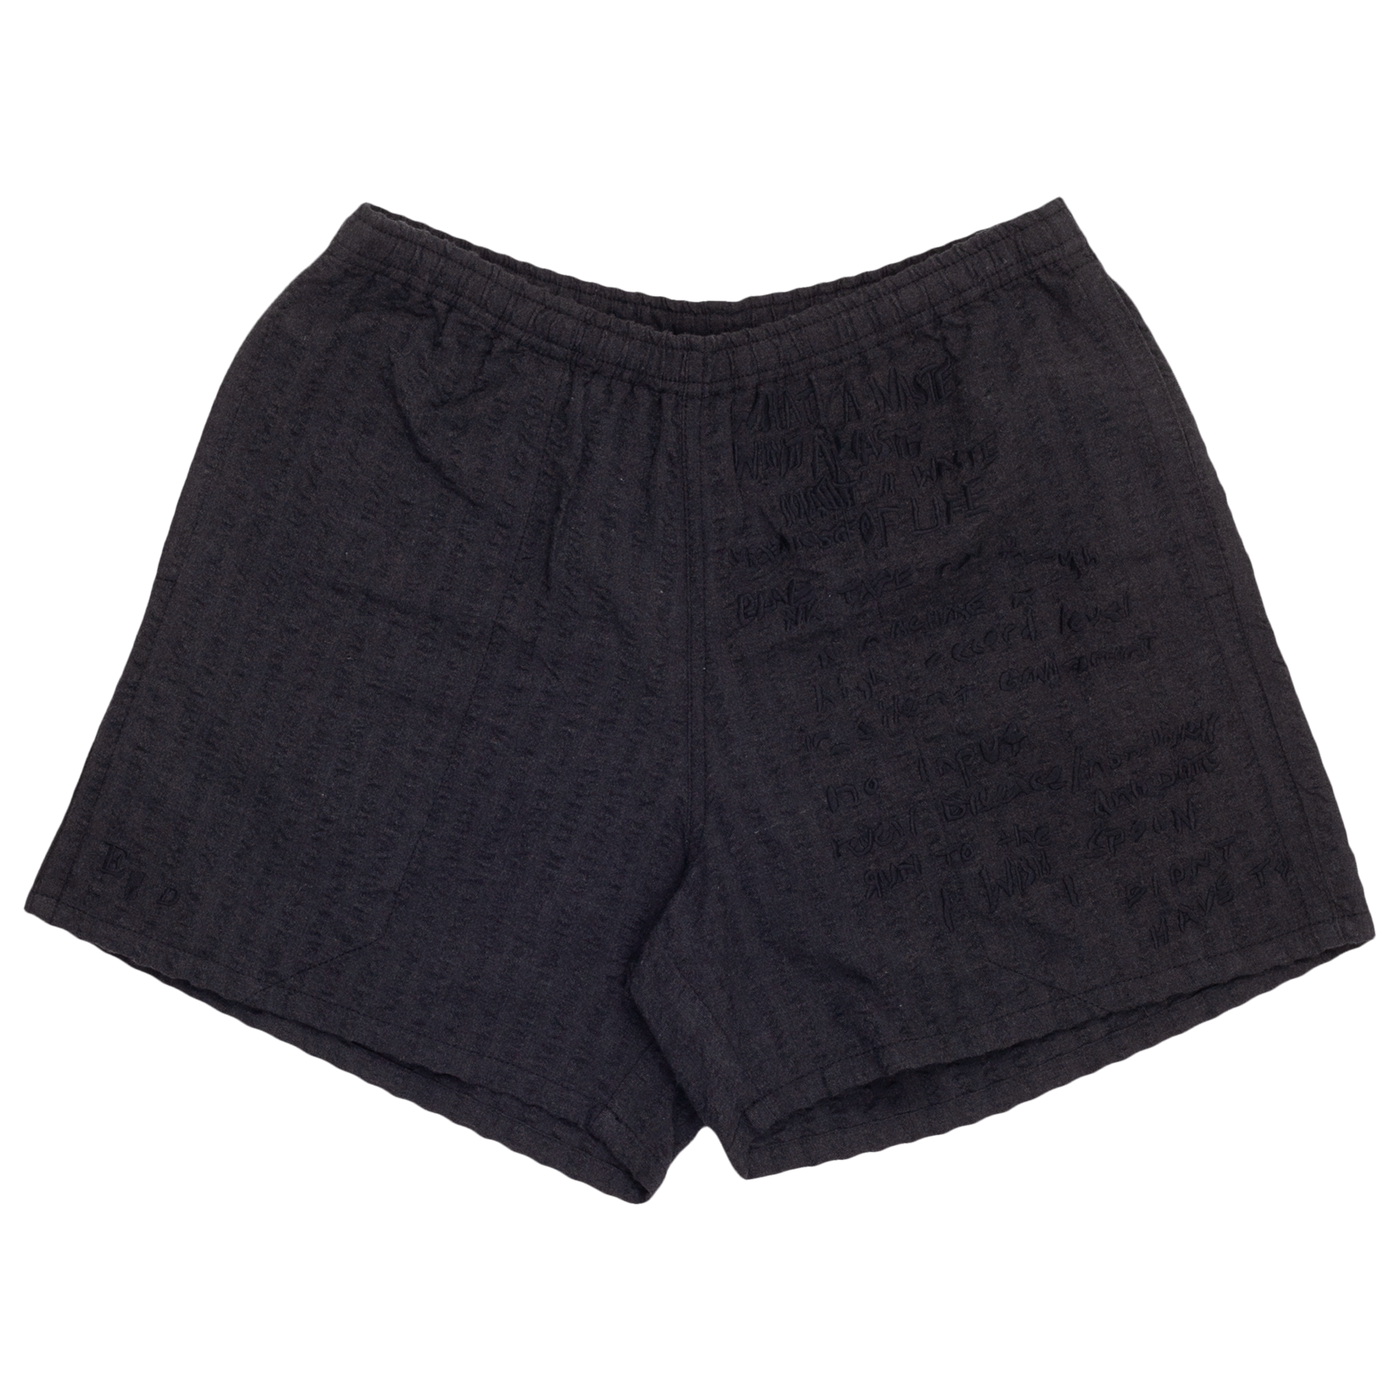 ERD Embroidery Shorts